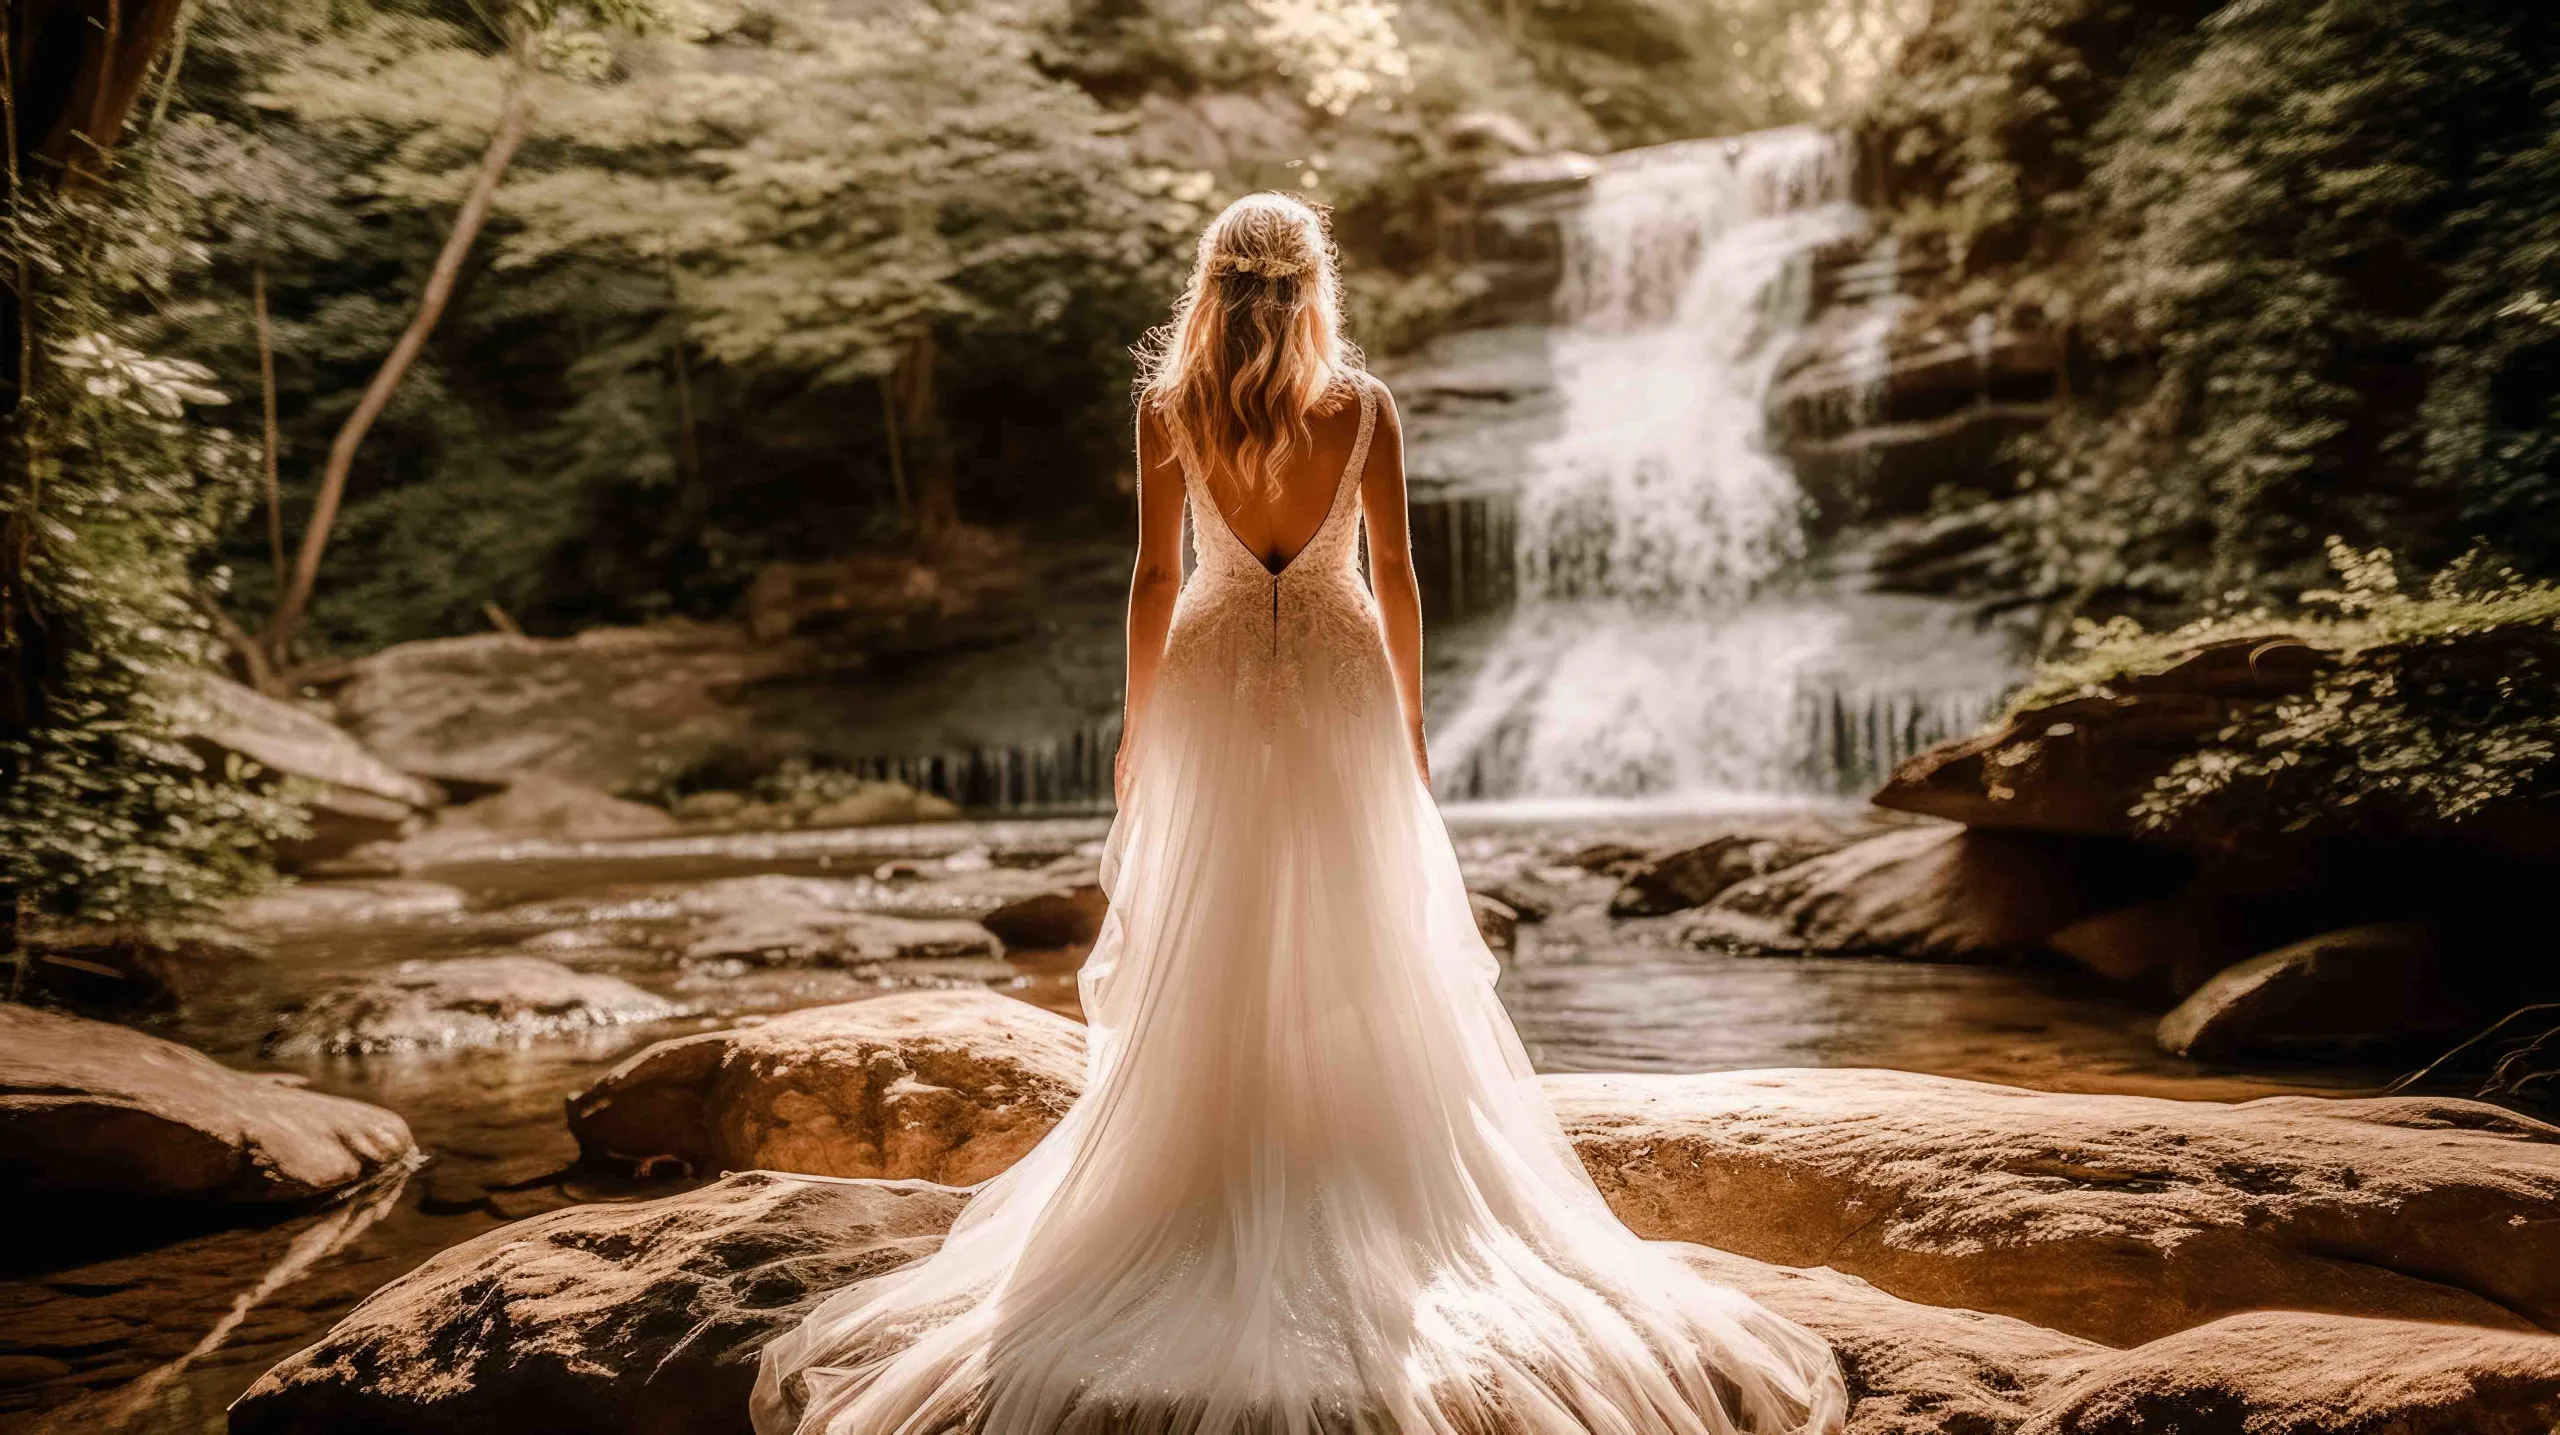 Pose the Bride: a woman in a wedding dress standing in front of a waterfall.